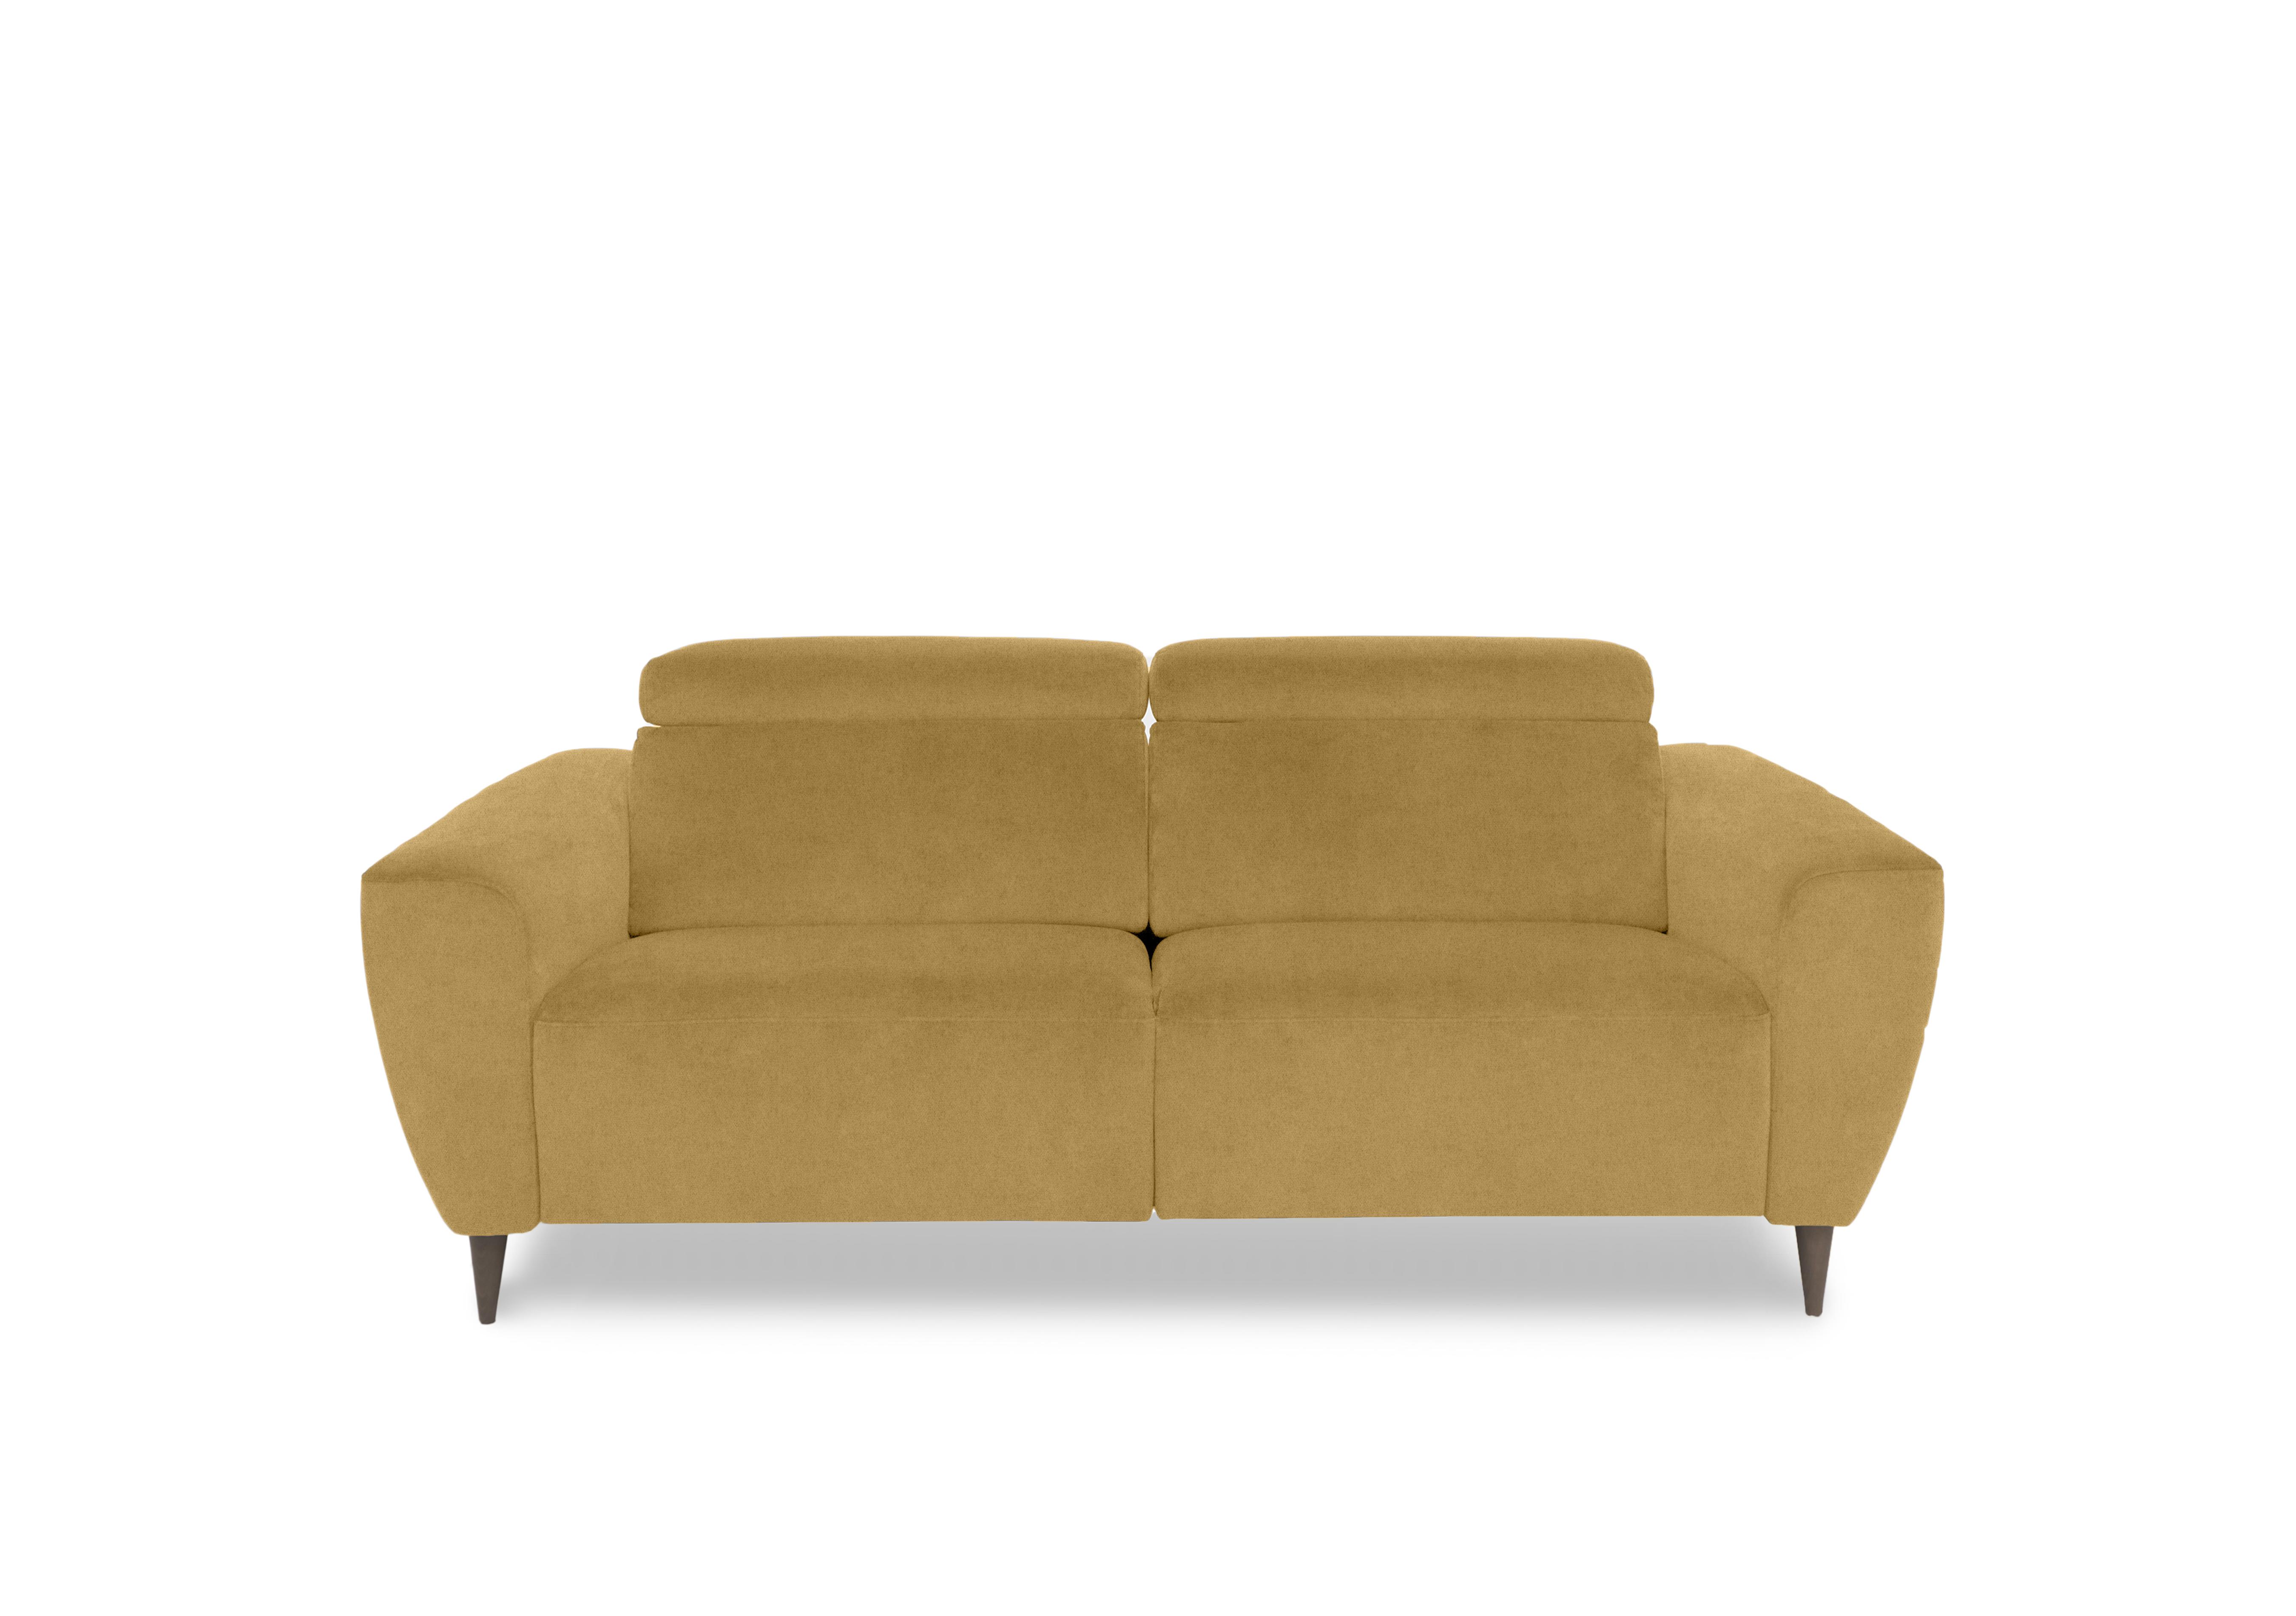 Milano 2.5 Seater Fabric Sofa in Fuente Mostaza To Ft on Furniture Village